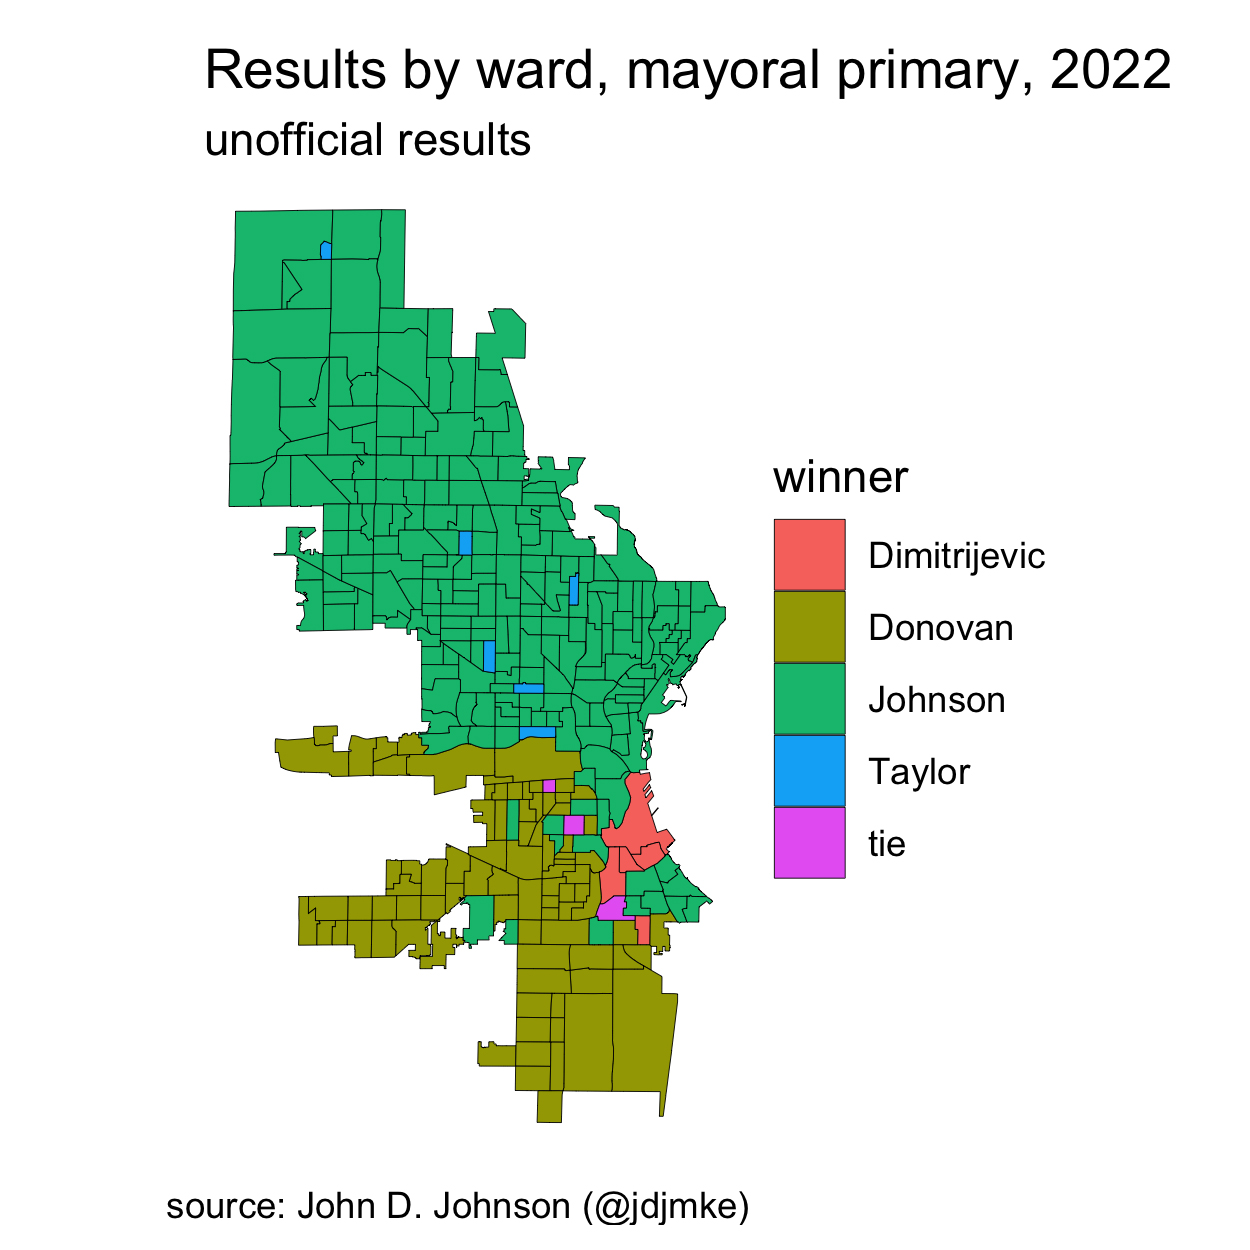 A map shows unofficial results by ward in the 2022 Milwaukee mayoral primary, with shading for Marina Dimitrijevic, Bob Donovan, Cavalier Johnson, Lena Taylor and tie votes.